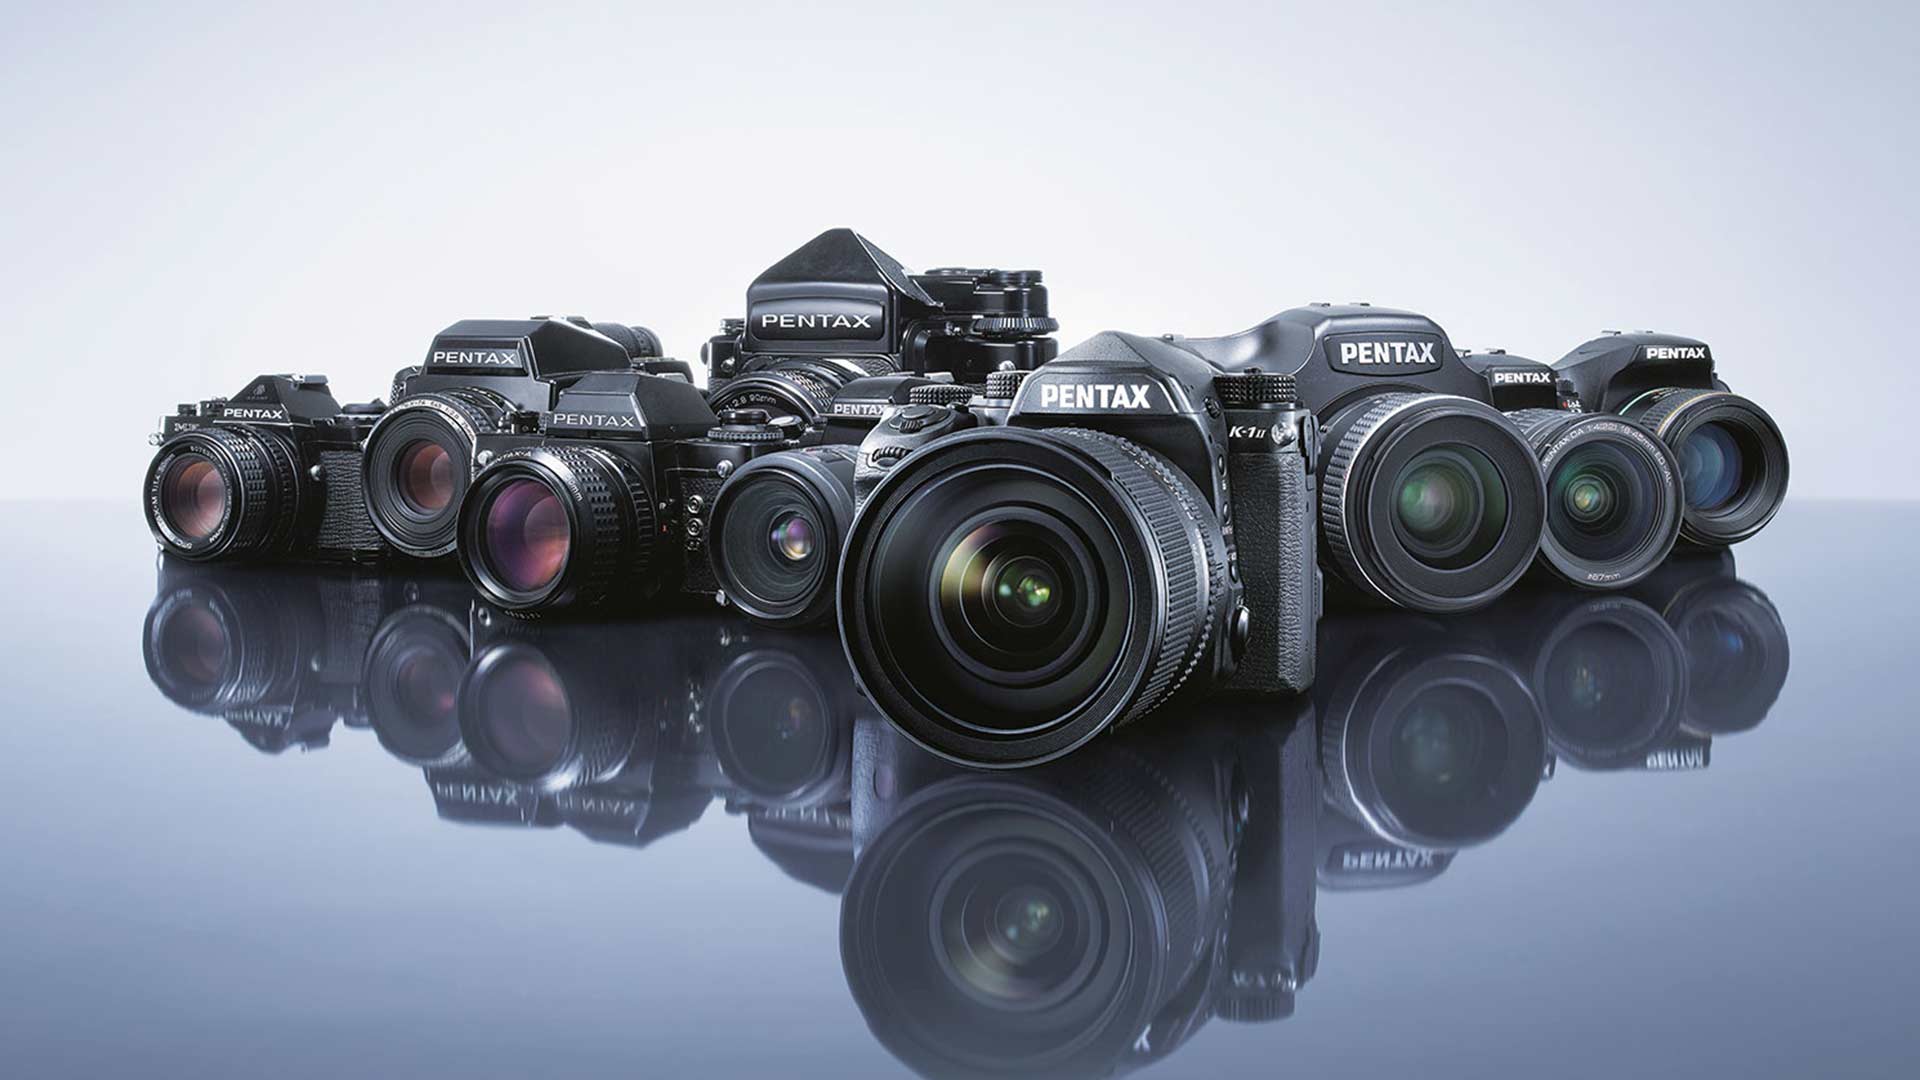 Old to new, Pentax has a rich history. Image: Ricoh Imaging.